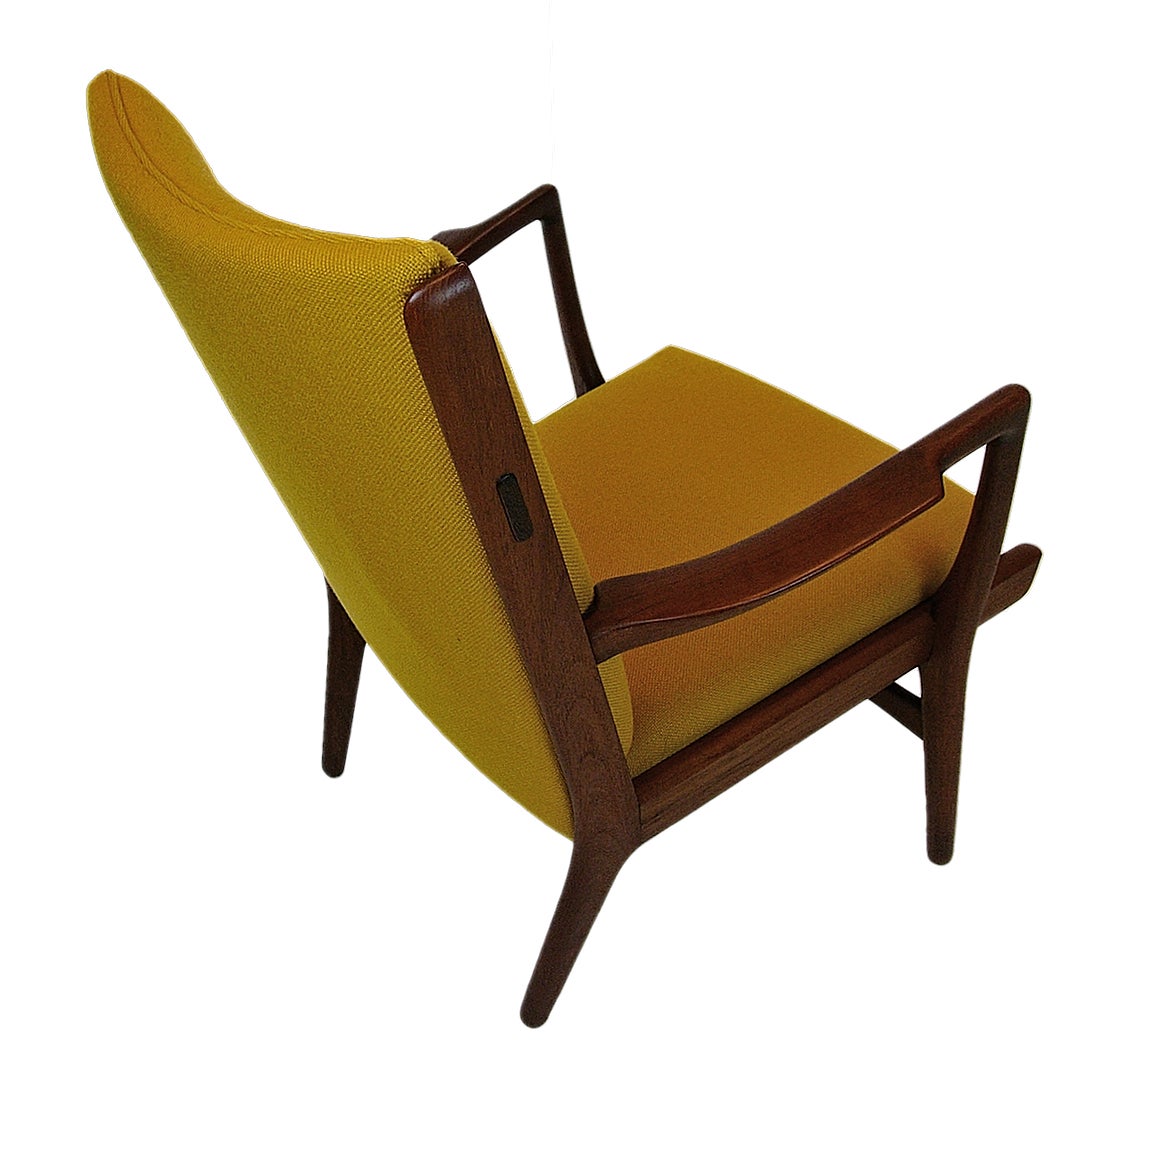 Oiled Pair of Hans Wegner Teak Lounge Chairs by A.P. Stolen